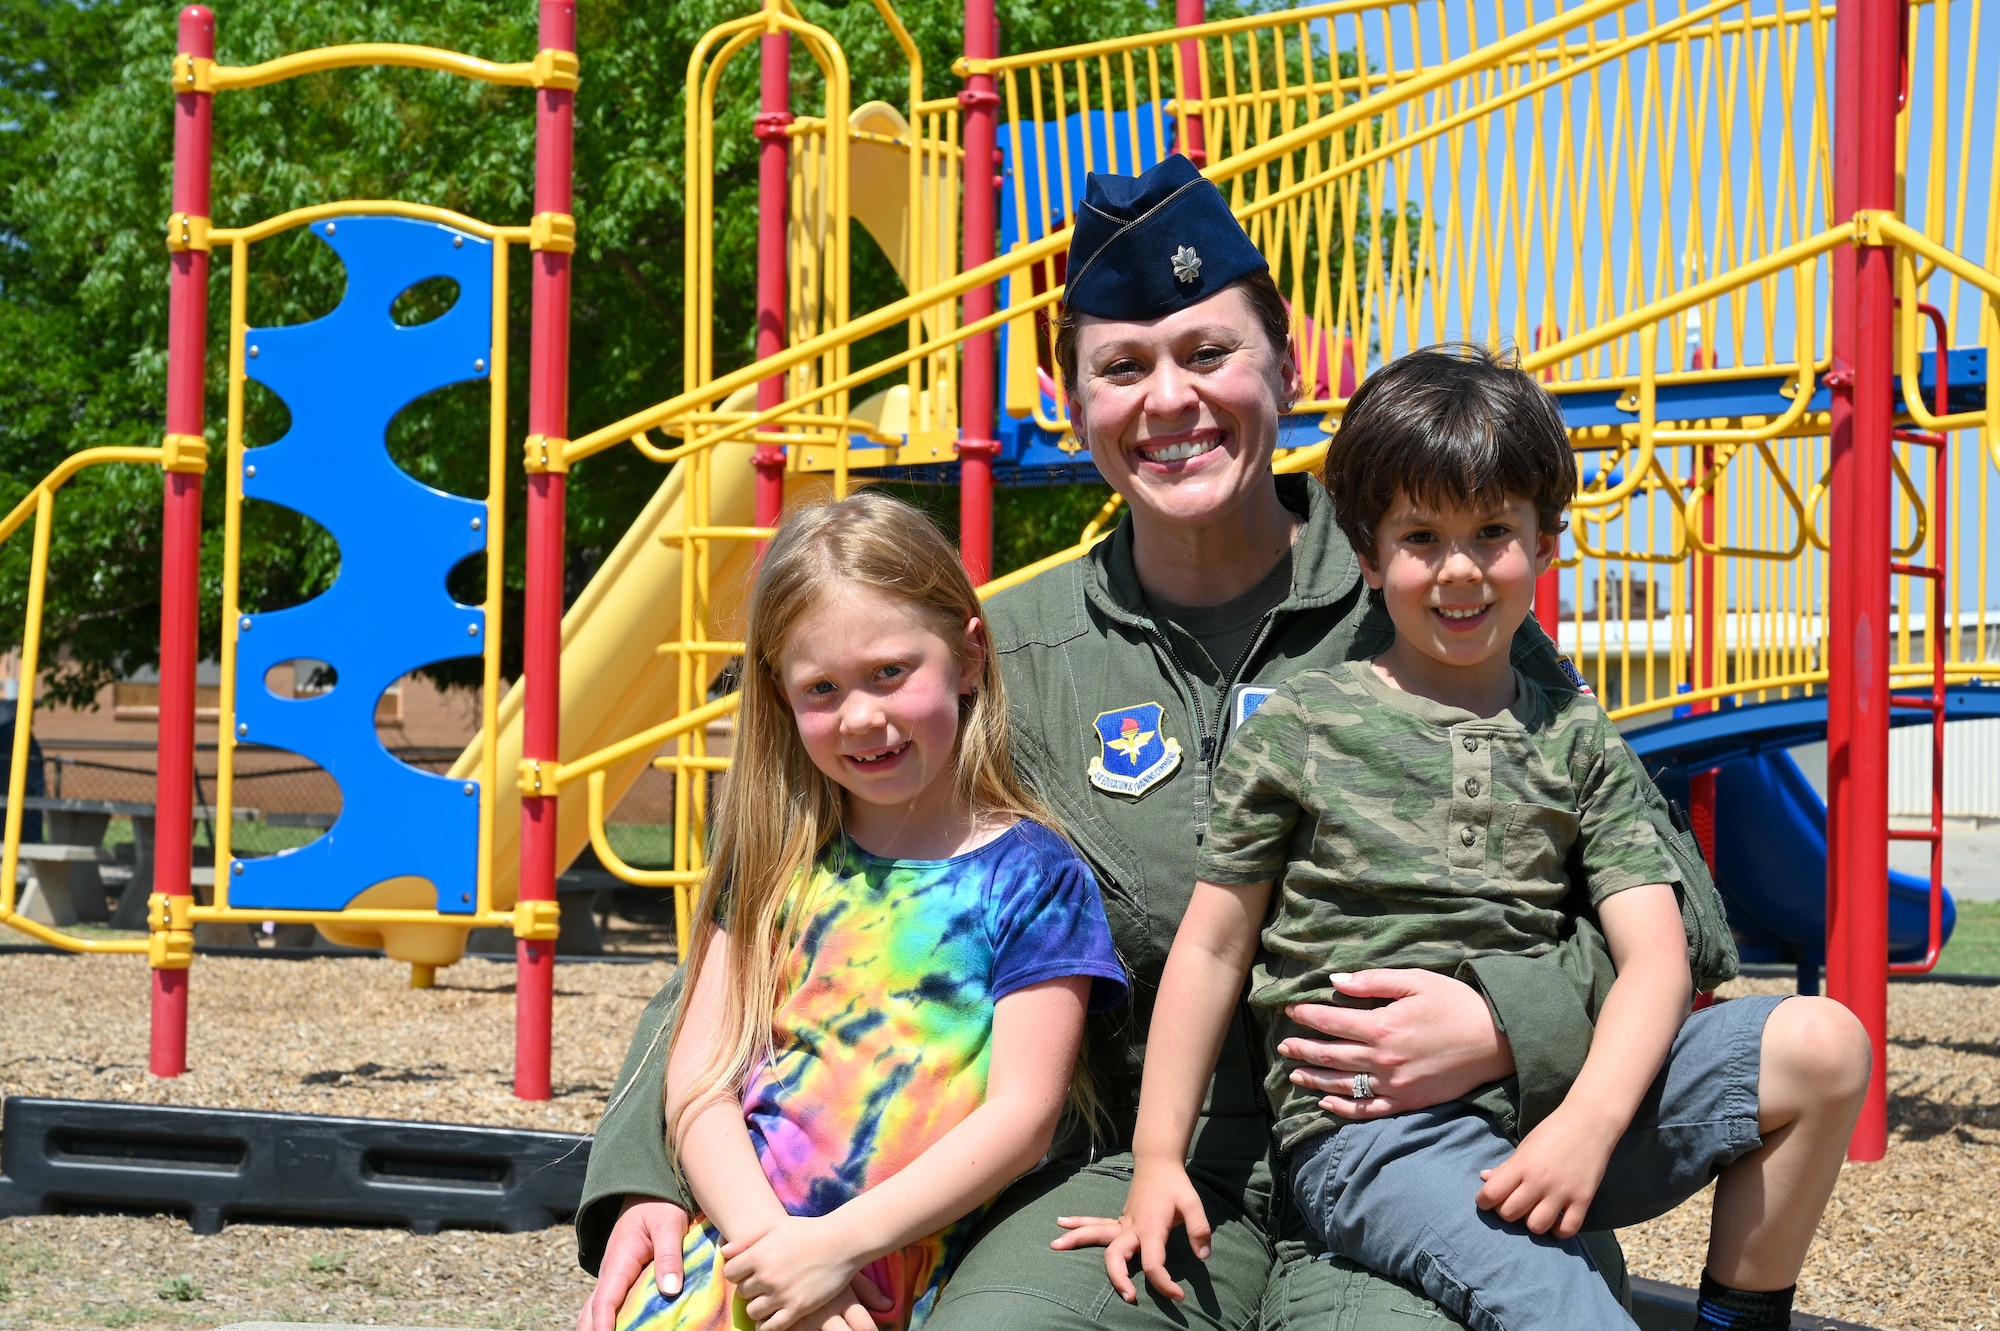 U.S. Air Force Lt. Col. Elizabeth Shaw, 97th Training Squadron operations officer, poses for a photo with her kids, Lillian and John, at Altus Air Force Base, Oklahoma, May 8, 2023. There are 1,025 female pilots in the U.S. Air Force. (U.S. Air Force photo by Senior Airman Kayla Christenson)